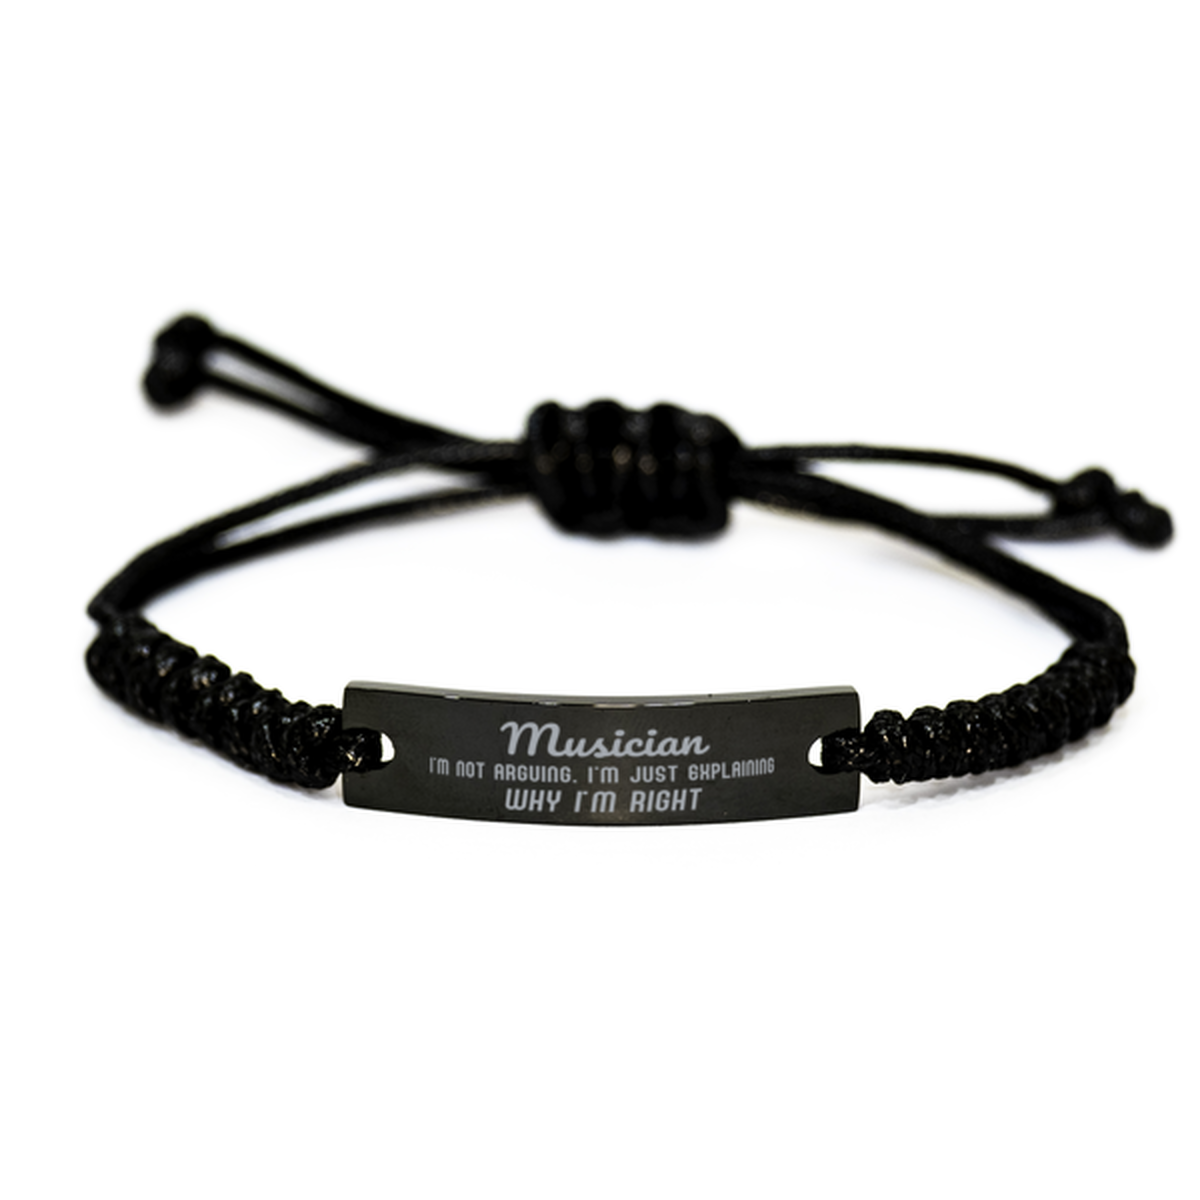 Musician I'm not Arguing. I'm Just Explaining Why I'm RIGHT Black Rope Bracelet, Funny Saying Quote Musician Gifts For Musician Graduation Birthday Christmas Gifts for Men Women Coworker